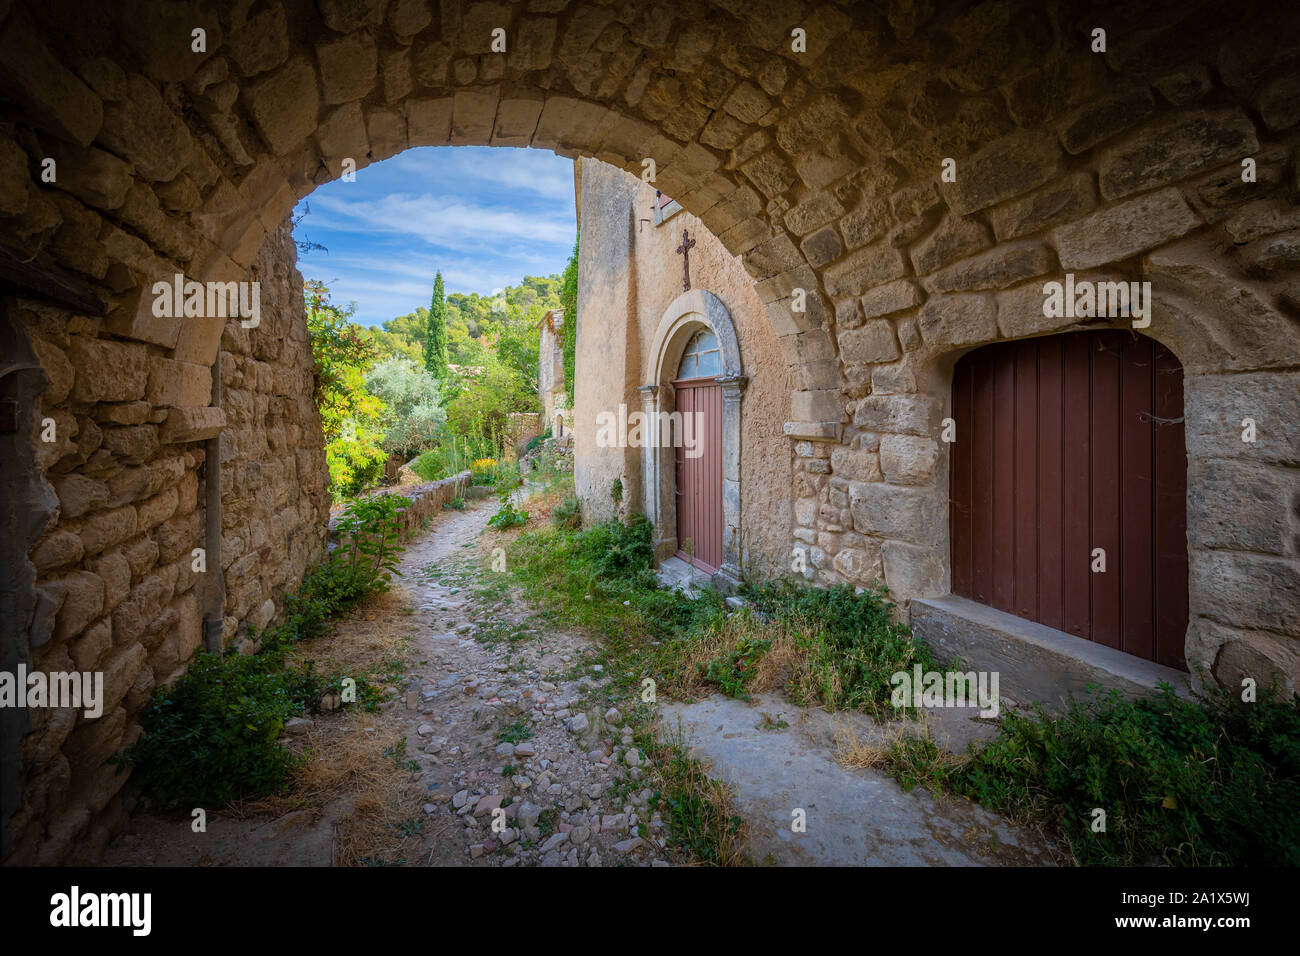 Oppède is a commune in the Vaucluse department in the Provence-Alpes-Côte d'Azur region in southeastern France. Oppidum is the Latin word for 'town'. Stock Photo